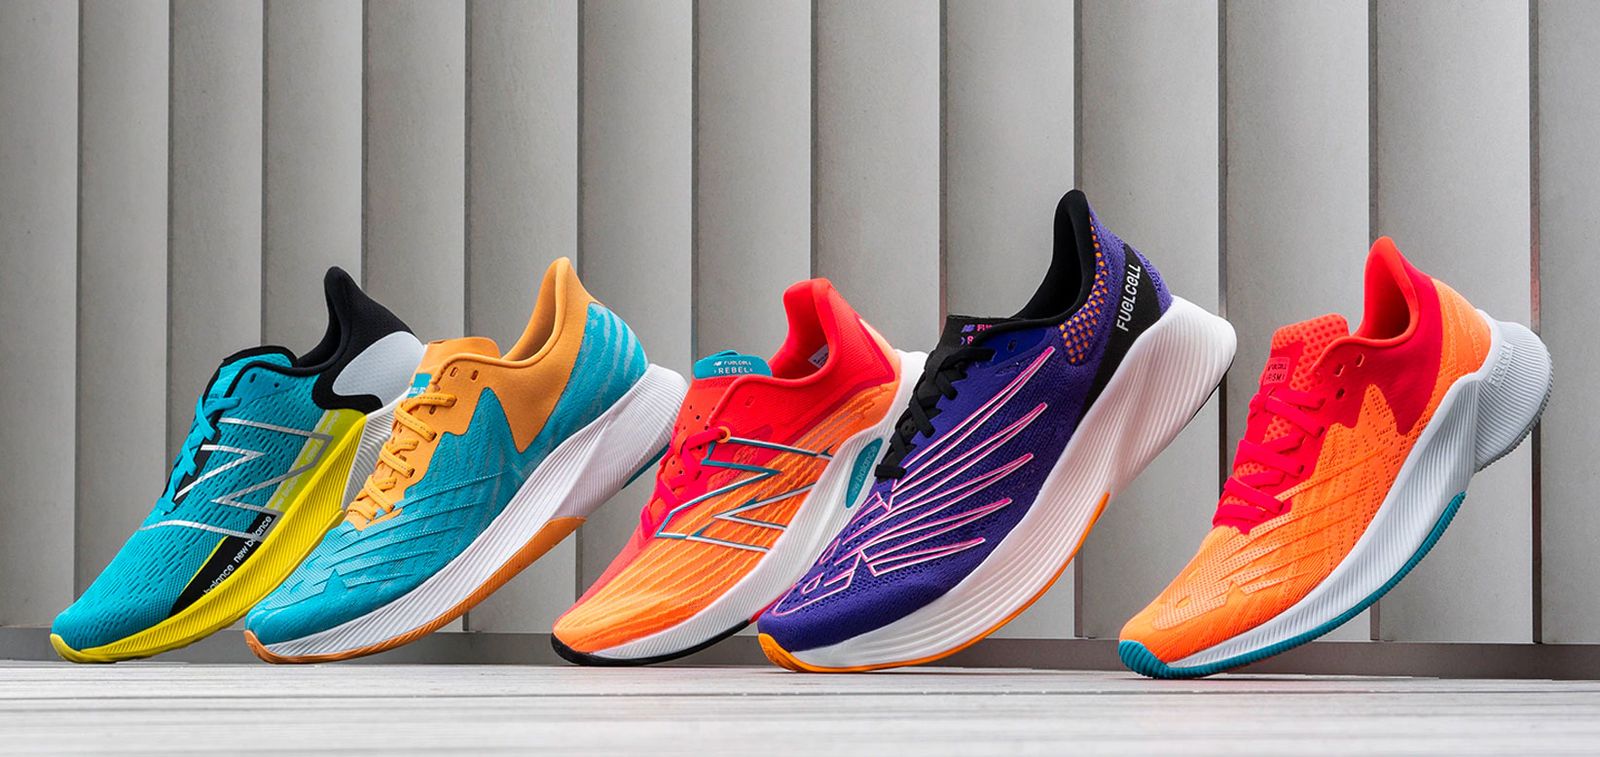 A selection of multi-coloured New Balance running shoes, including orange, blue, and purple options.